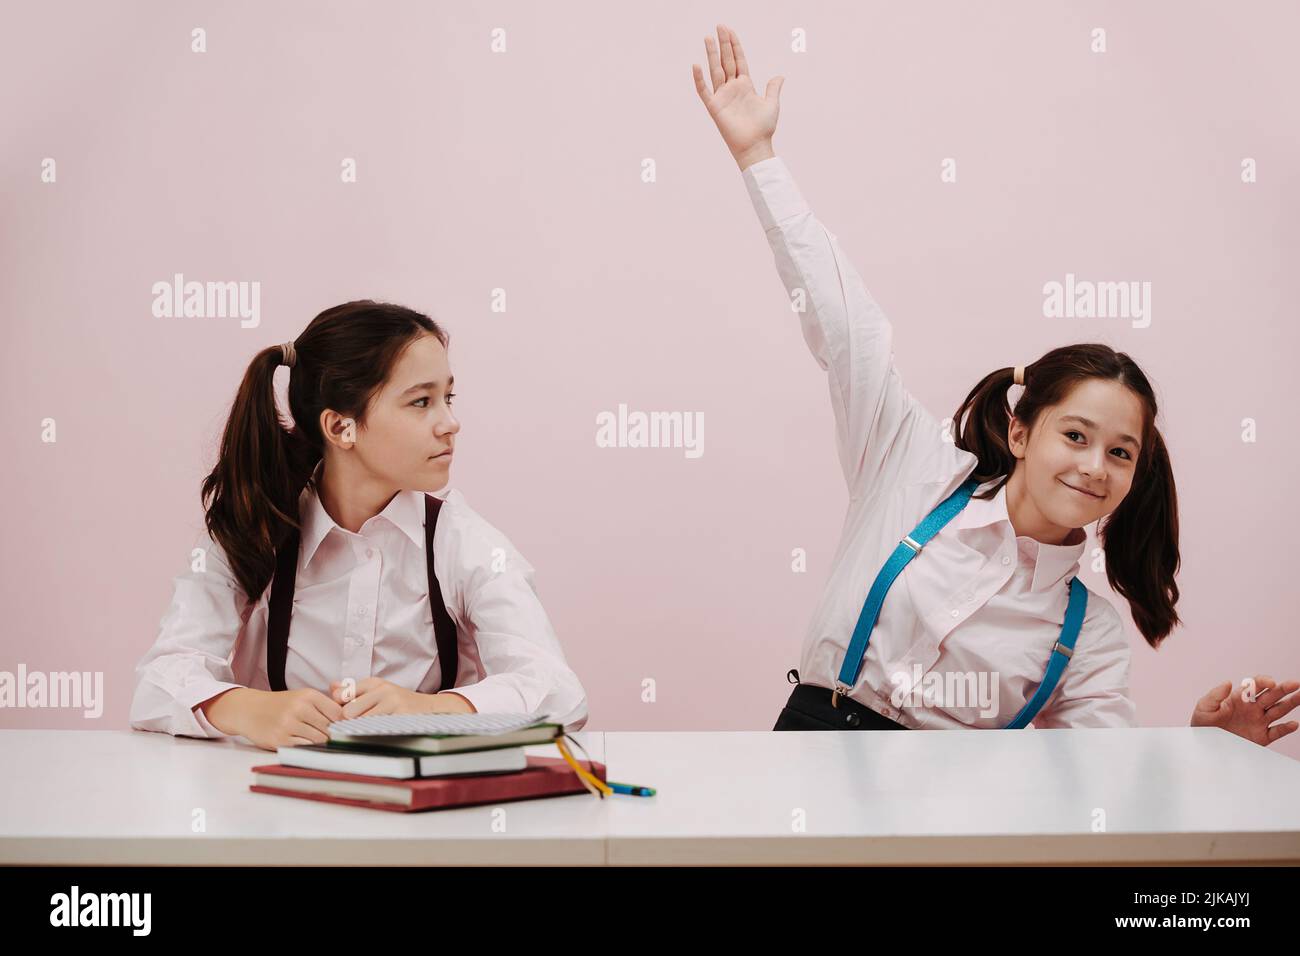 Enthusiastic perky schoolgirl raising a hand, her twin eyeing her with suspition Stock Photo